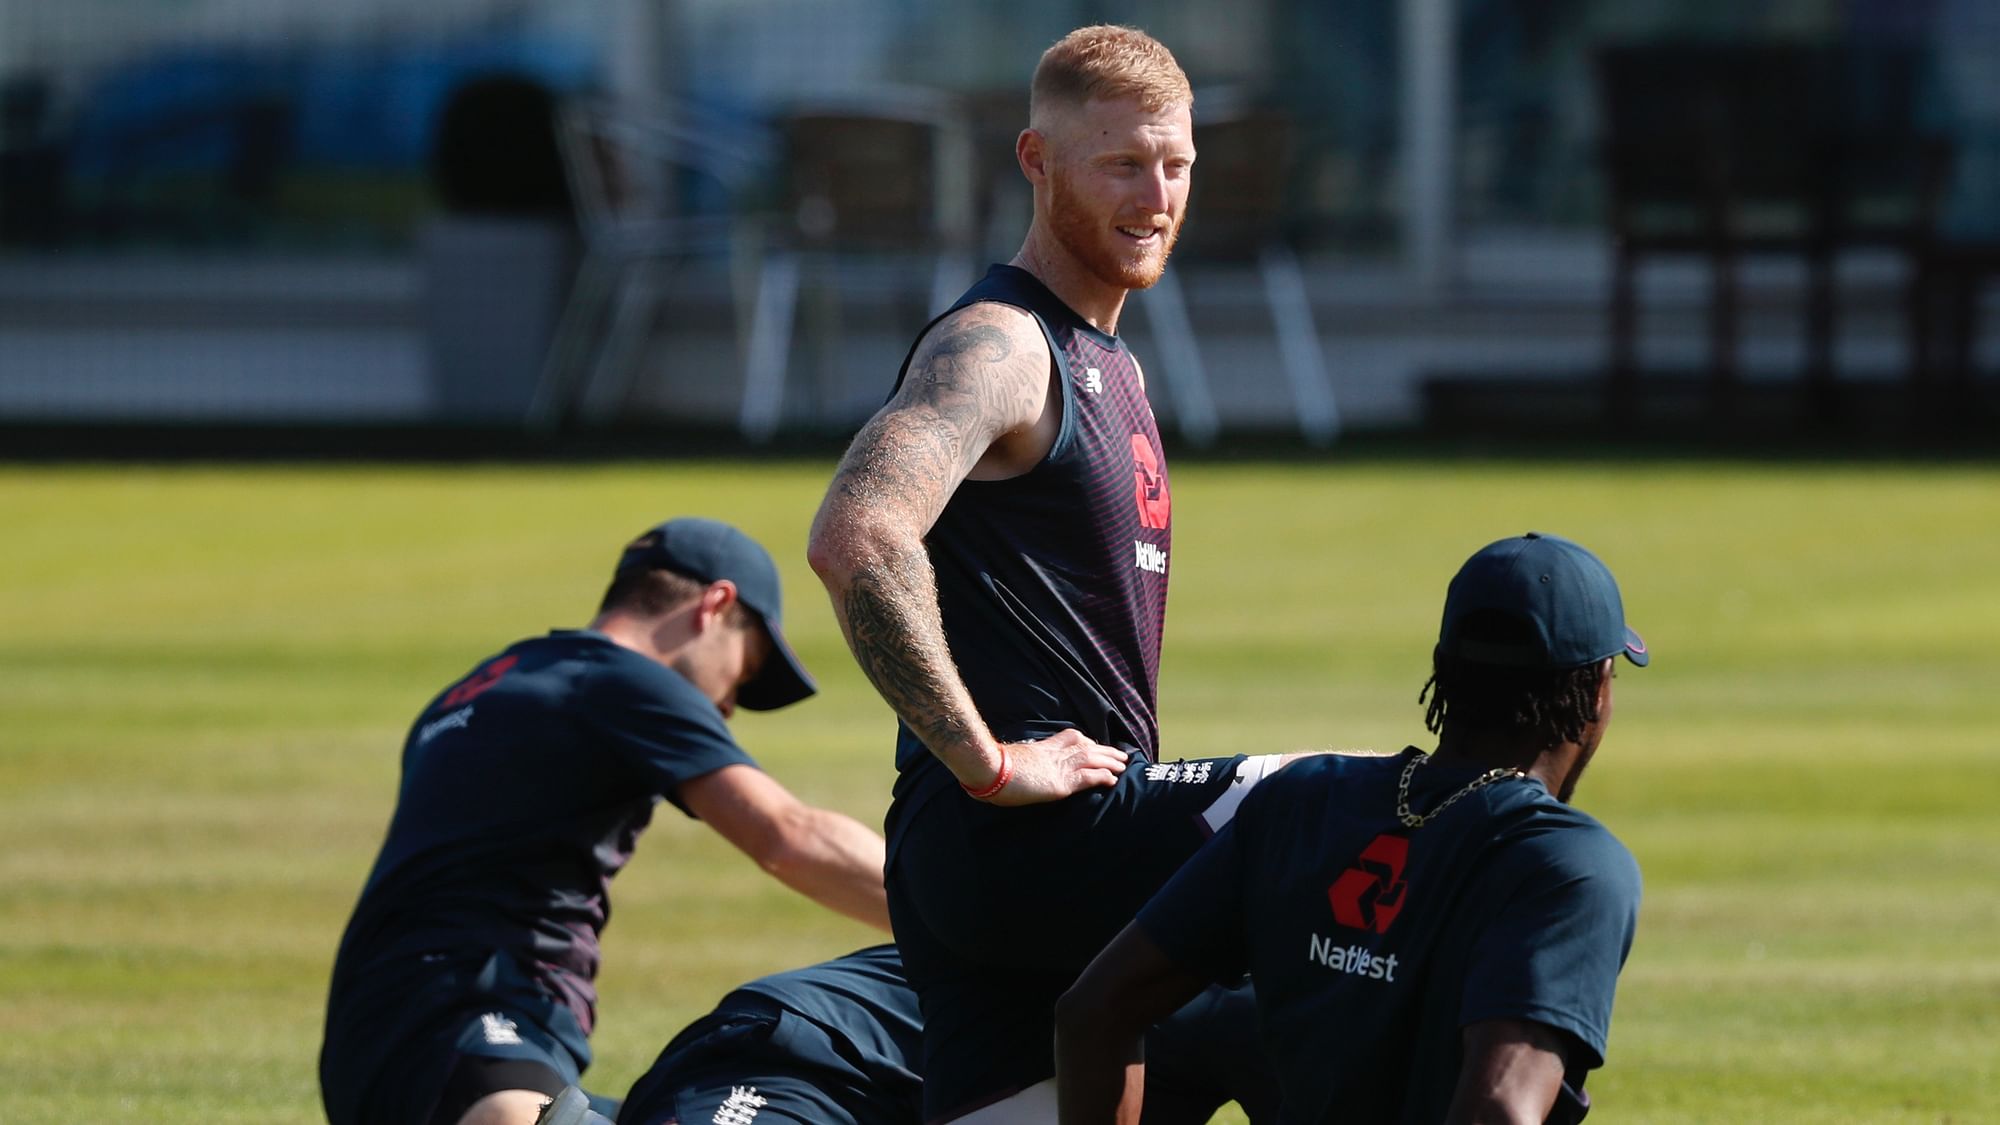 England’s Ben Stokes has insisted he would trade all the personal success he has enjoyed in 2019 if it meant his father was no longer in hospital.